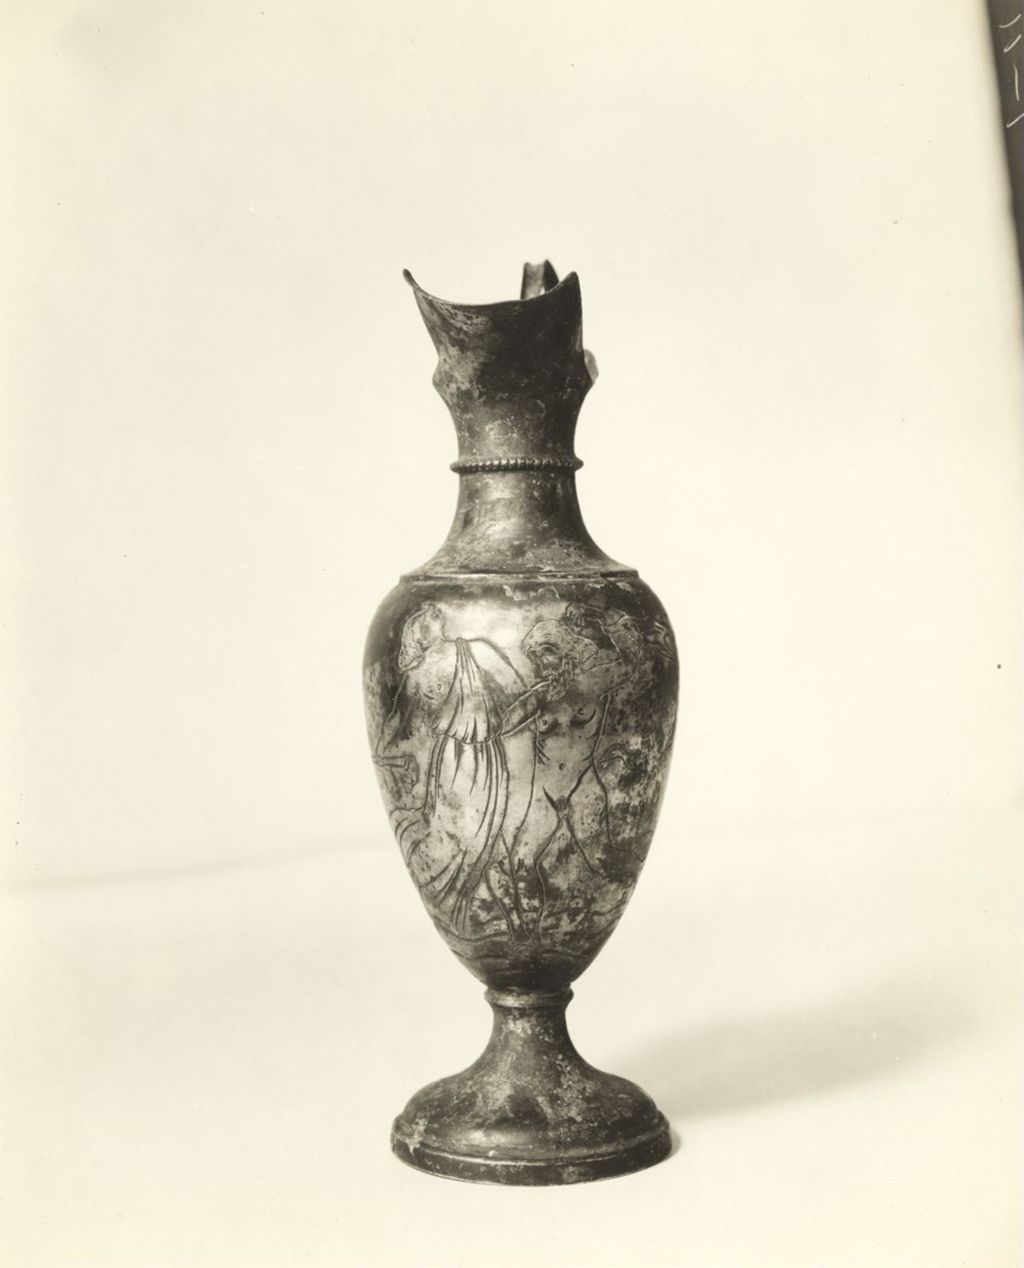 Miniature of Silver vase from Pompeii